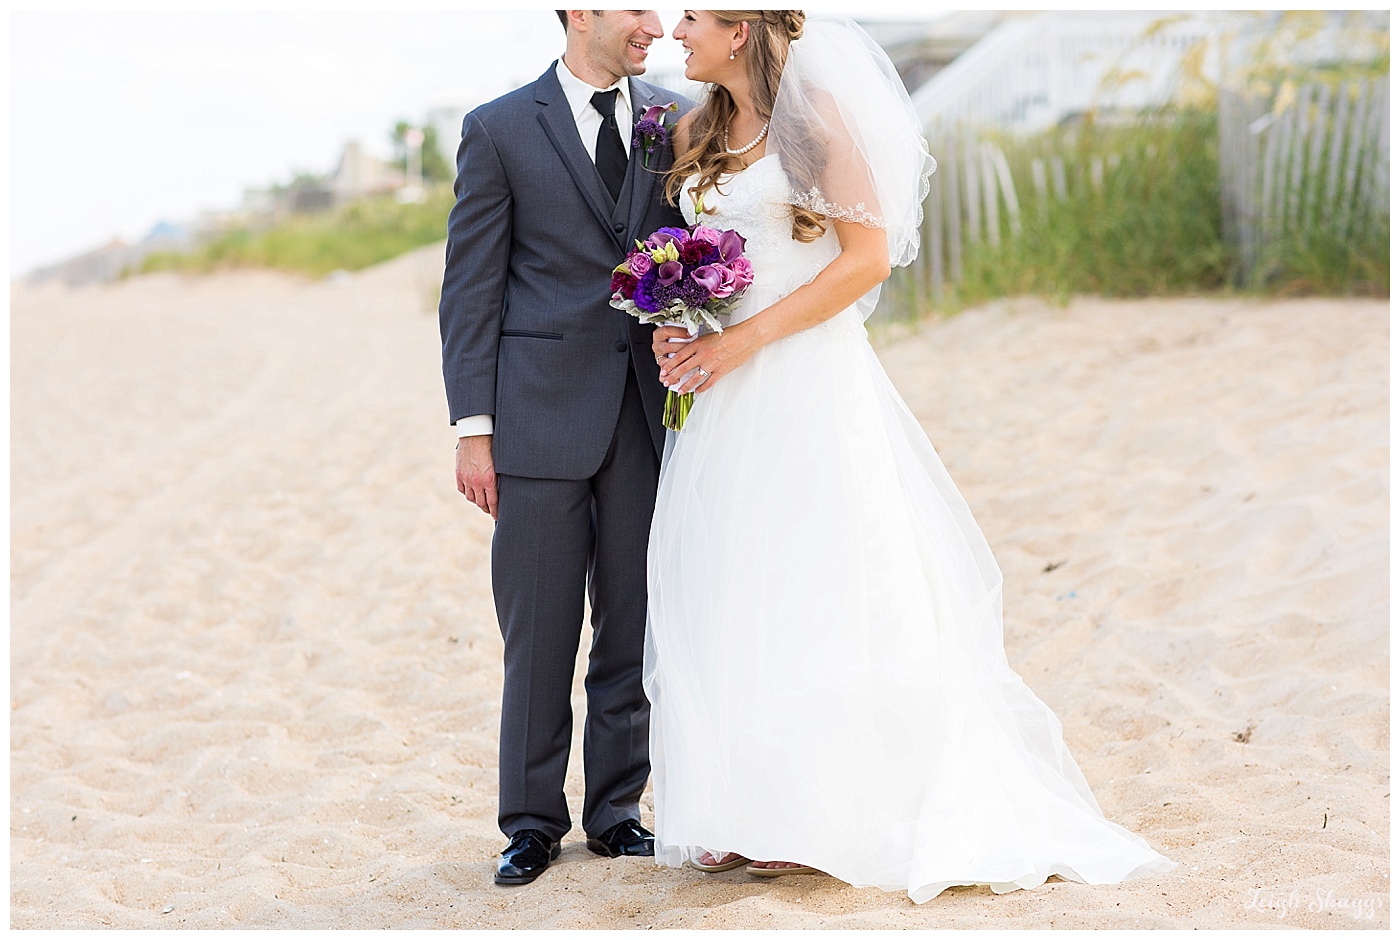 Remy & Michael are Married!  Their Virginia Beach Water Table wedding was such a fun day!!  